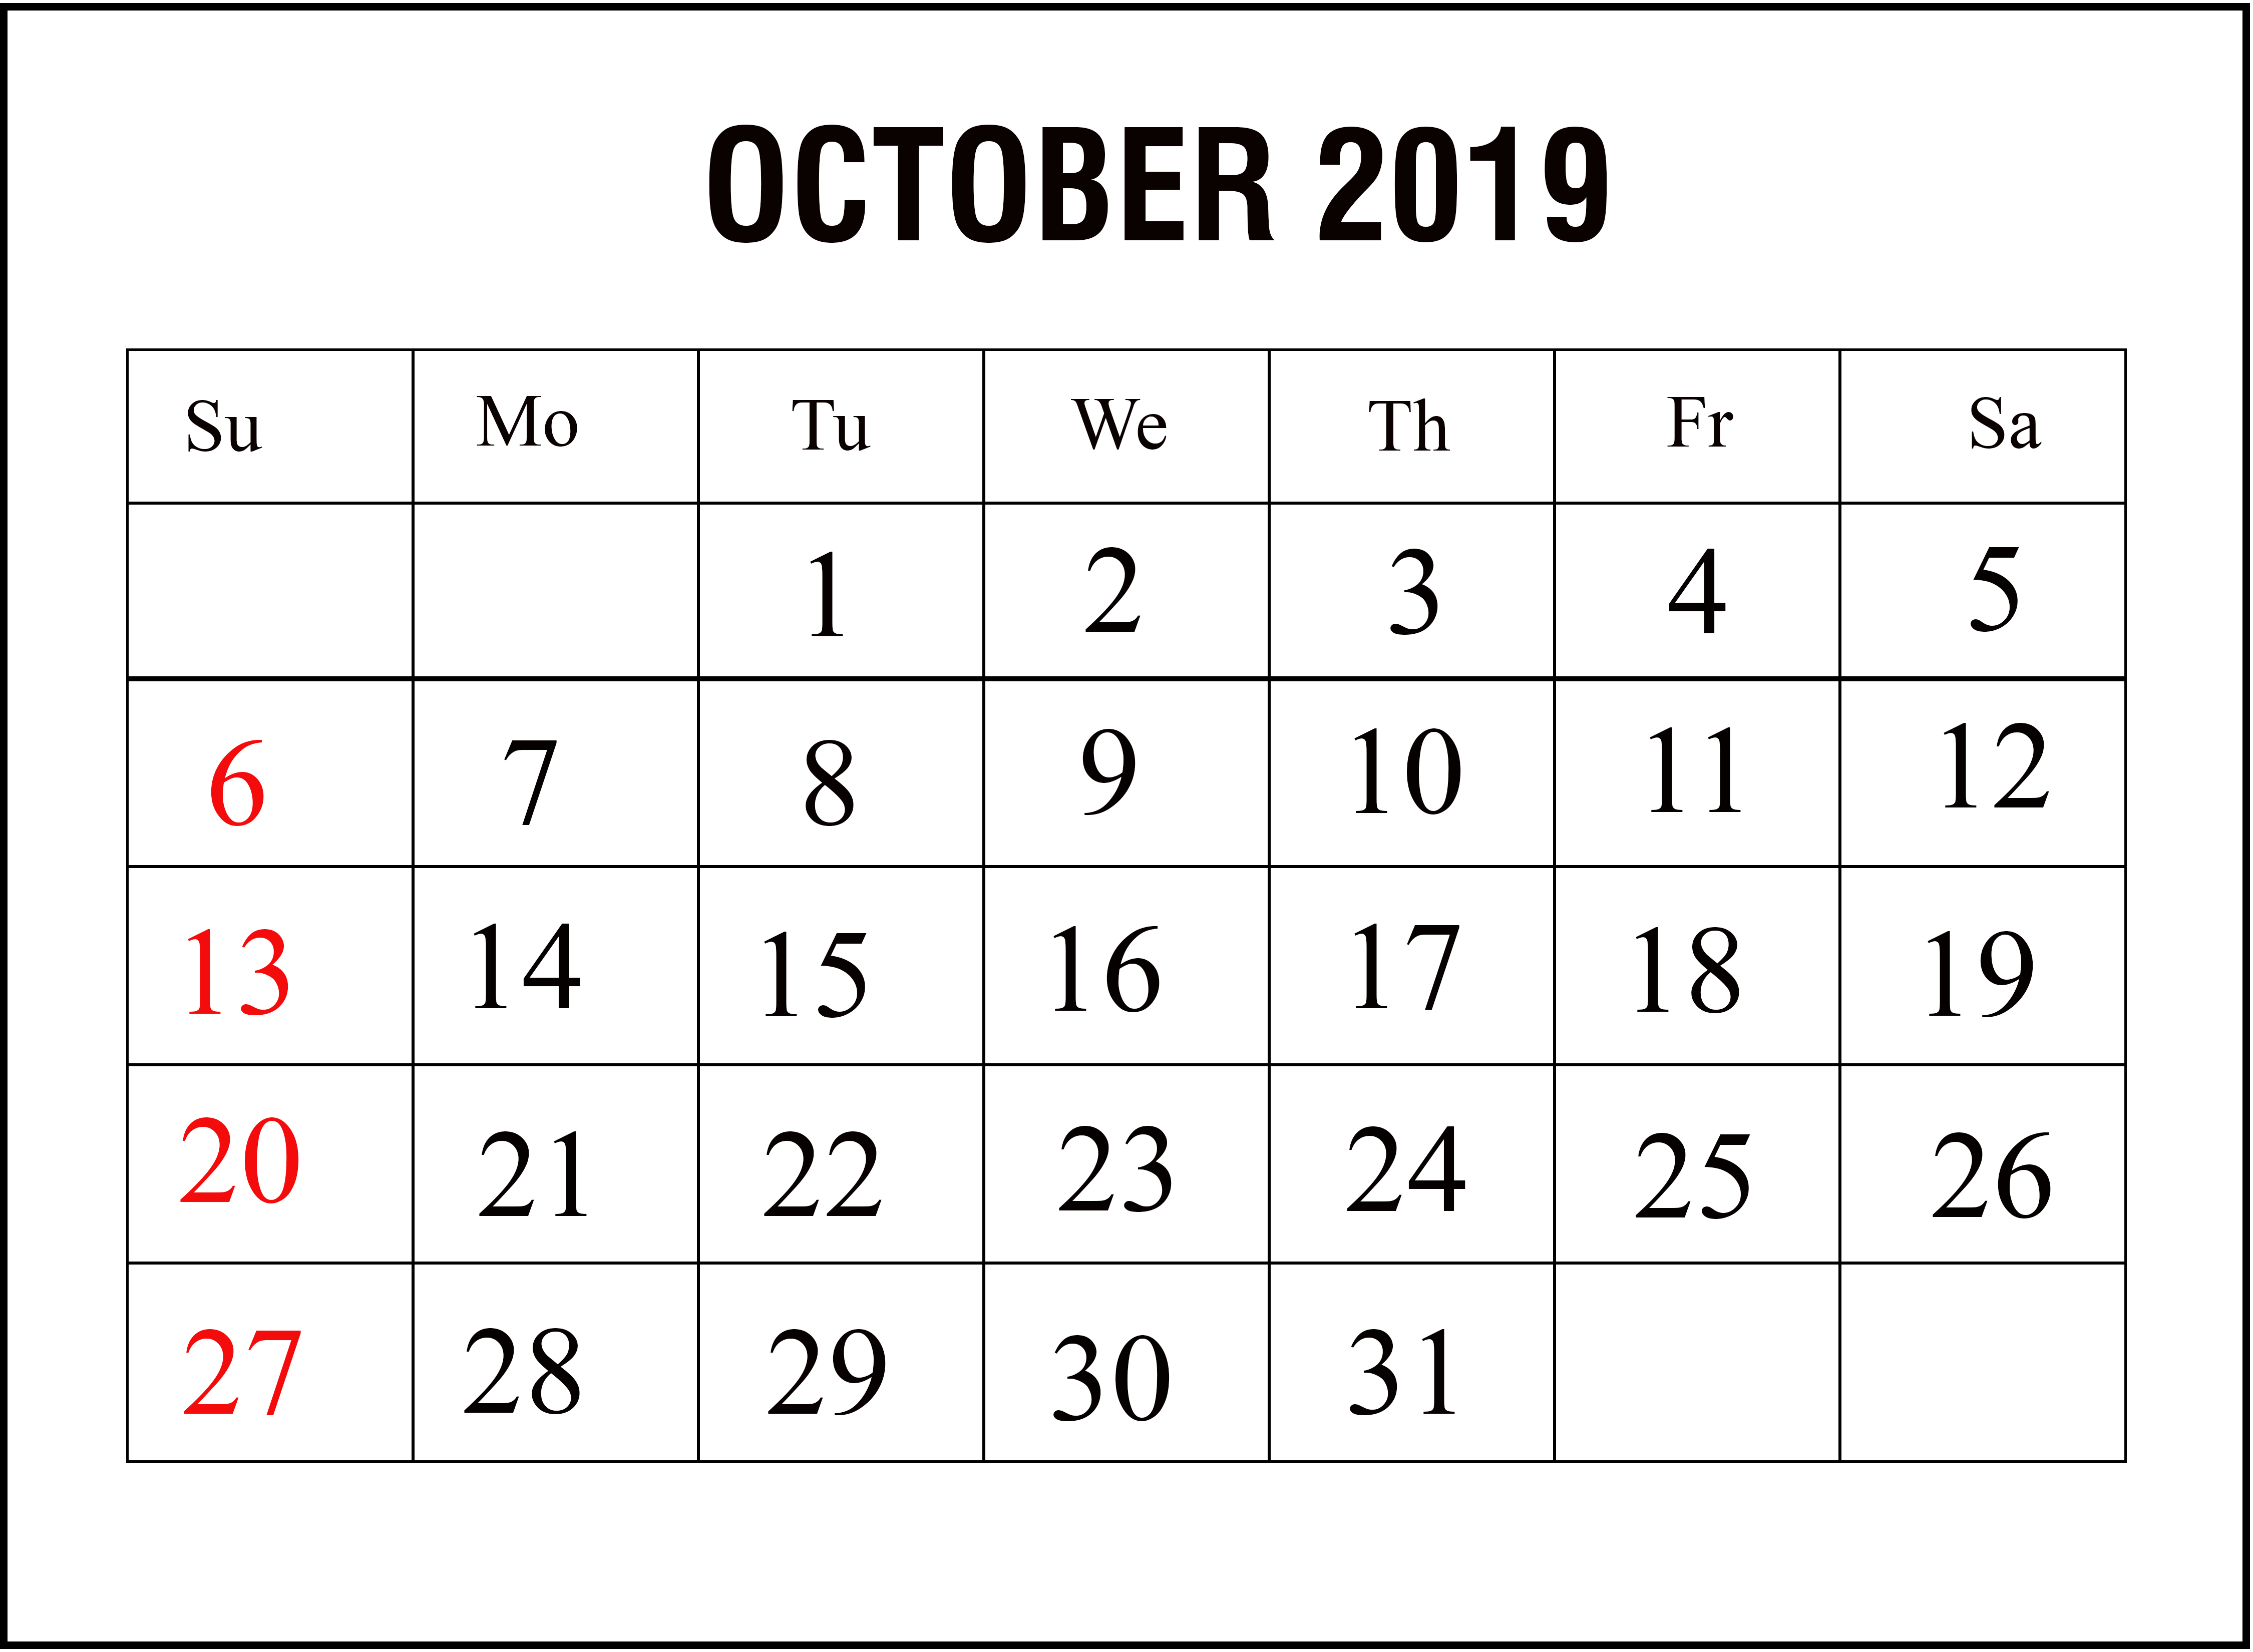 how long ago was october 2019